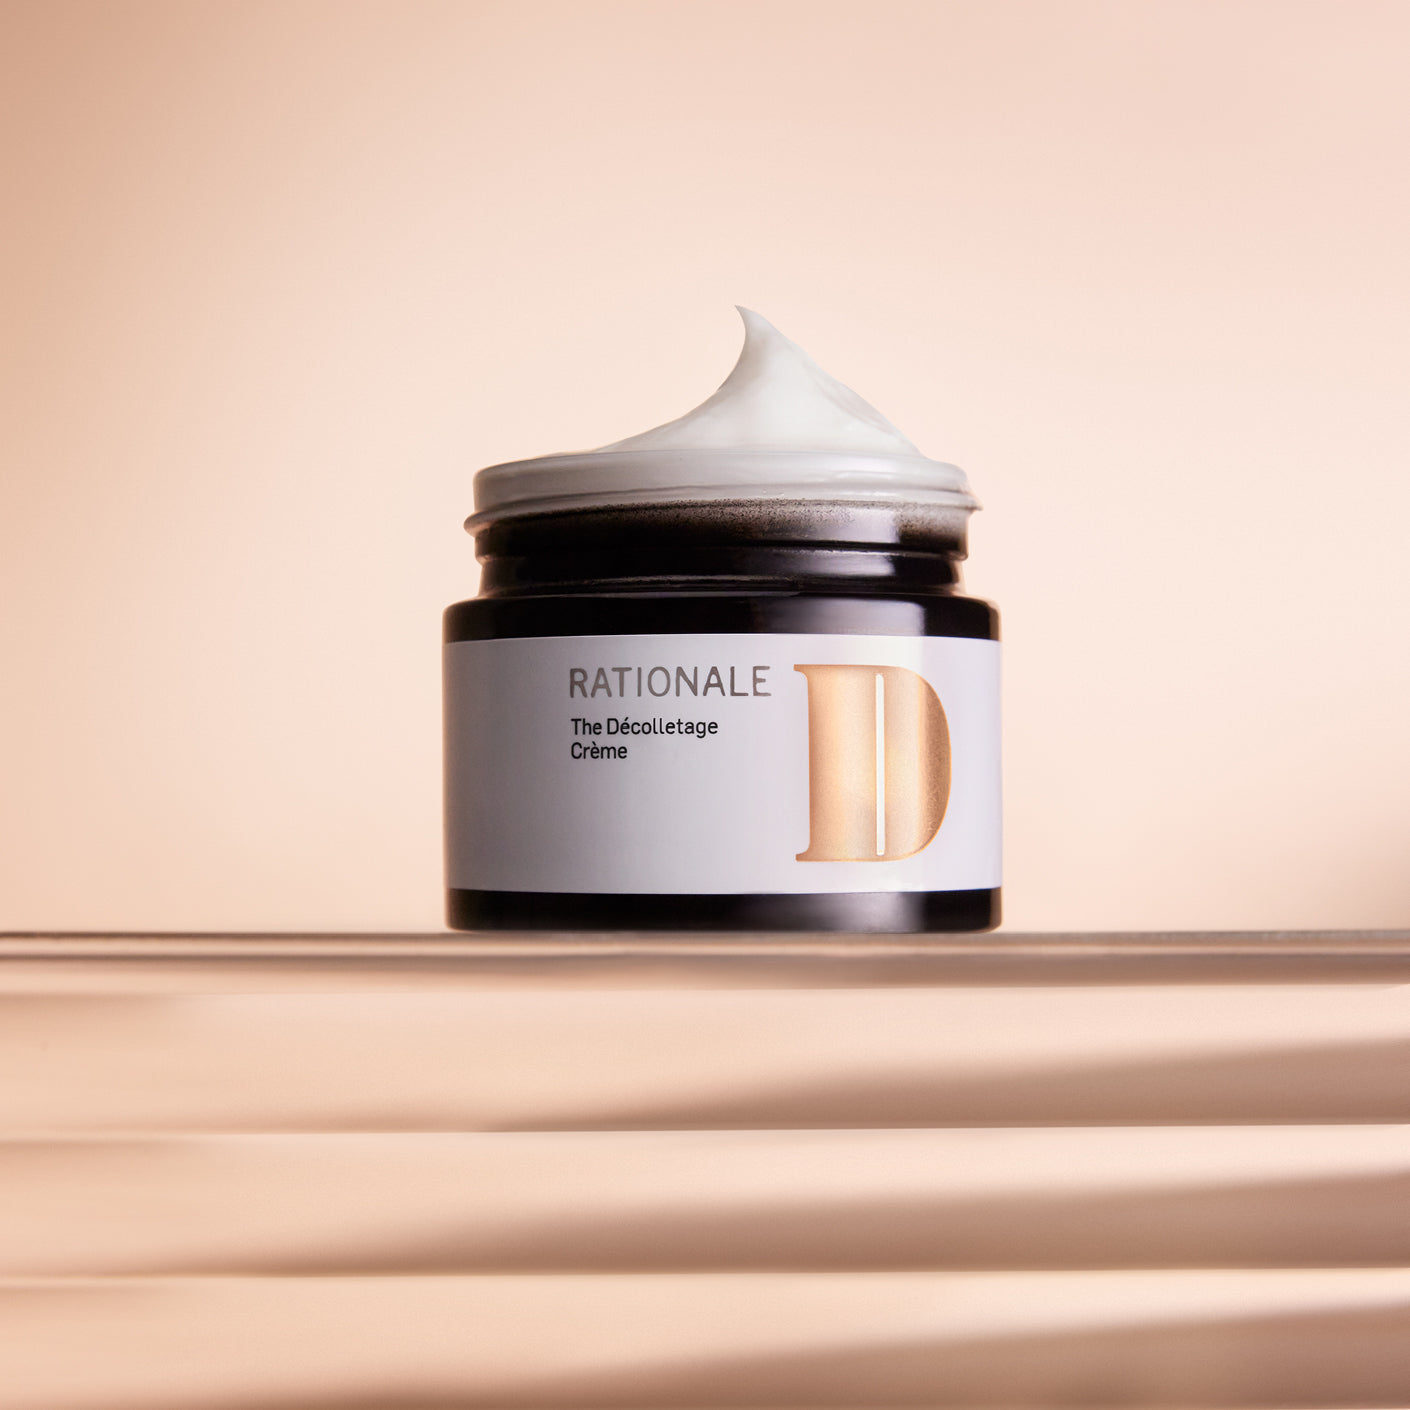 What is The Décolletage Crème; And Why Do I Need It?